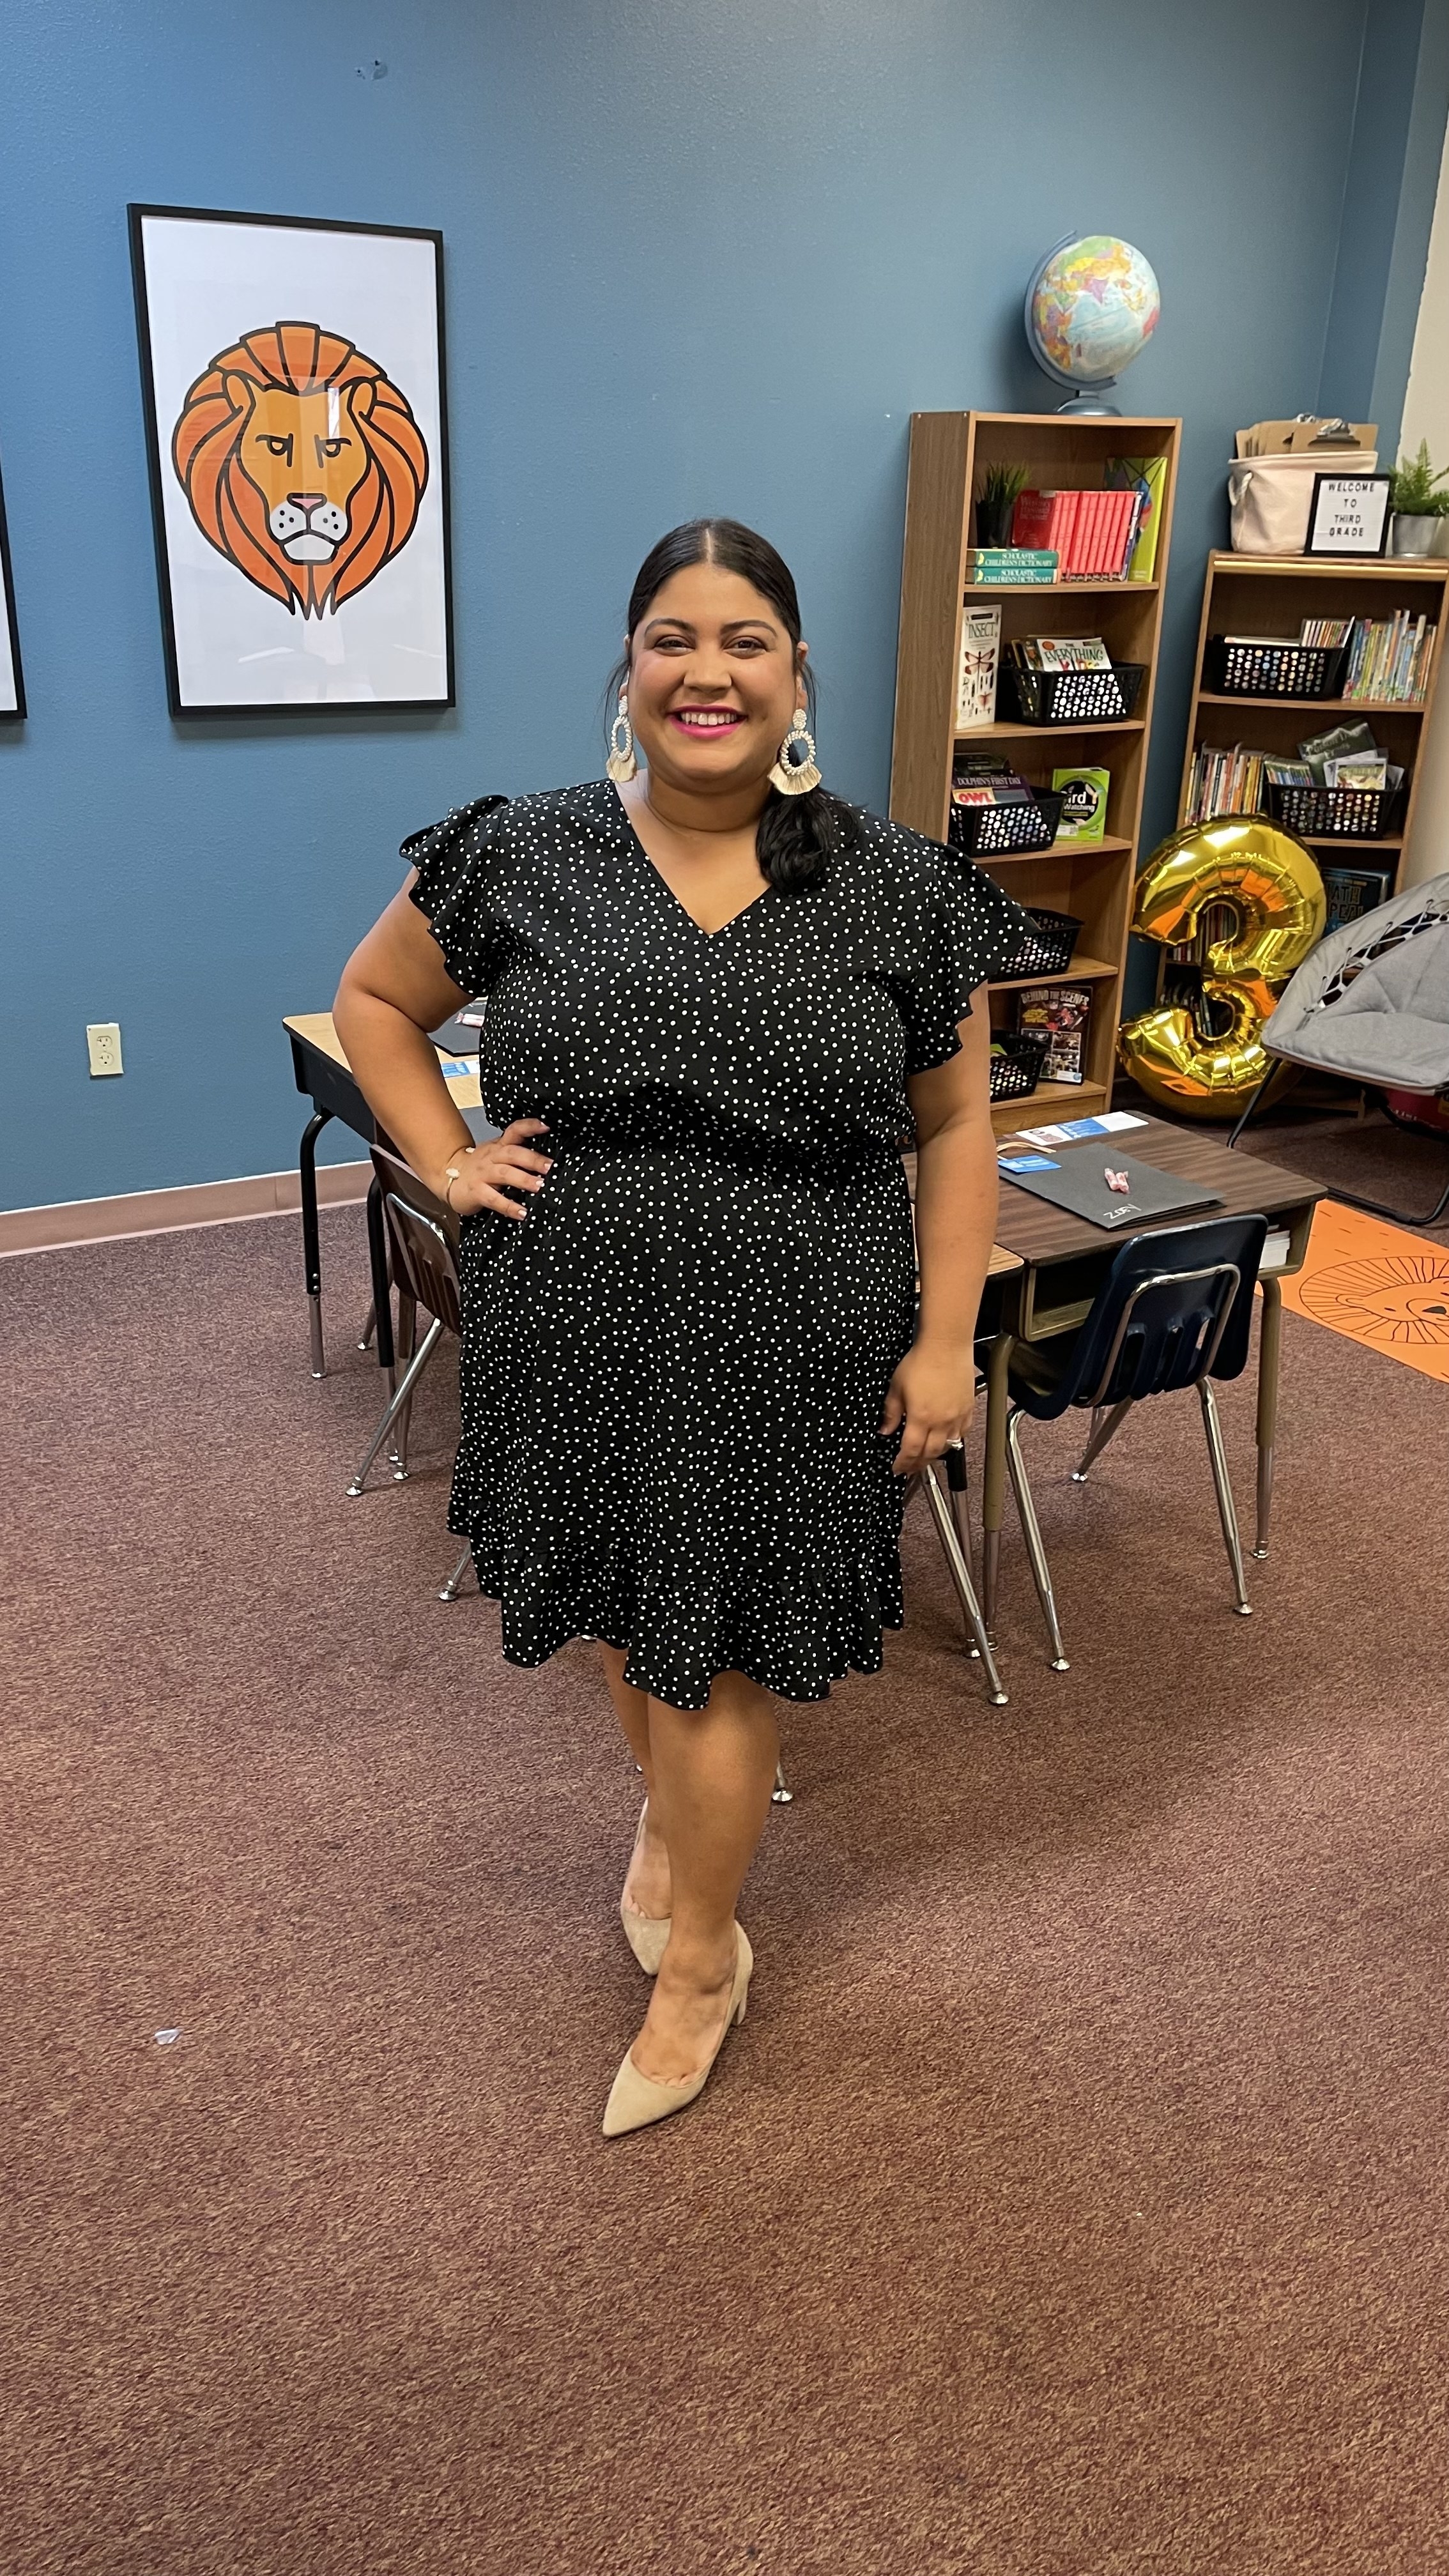 Sheila standing in a classroom wearing black polka-dotted dress